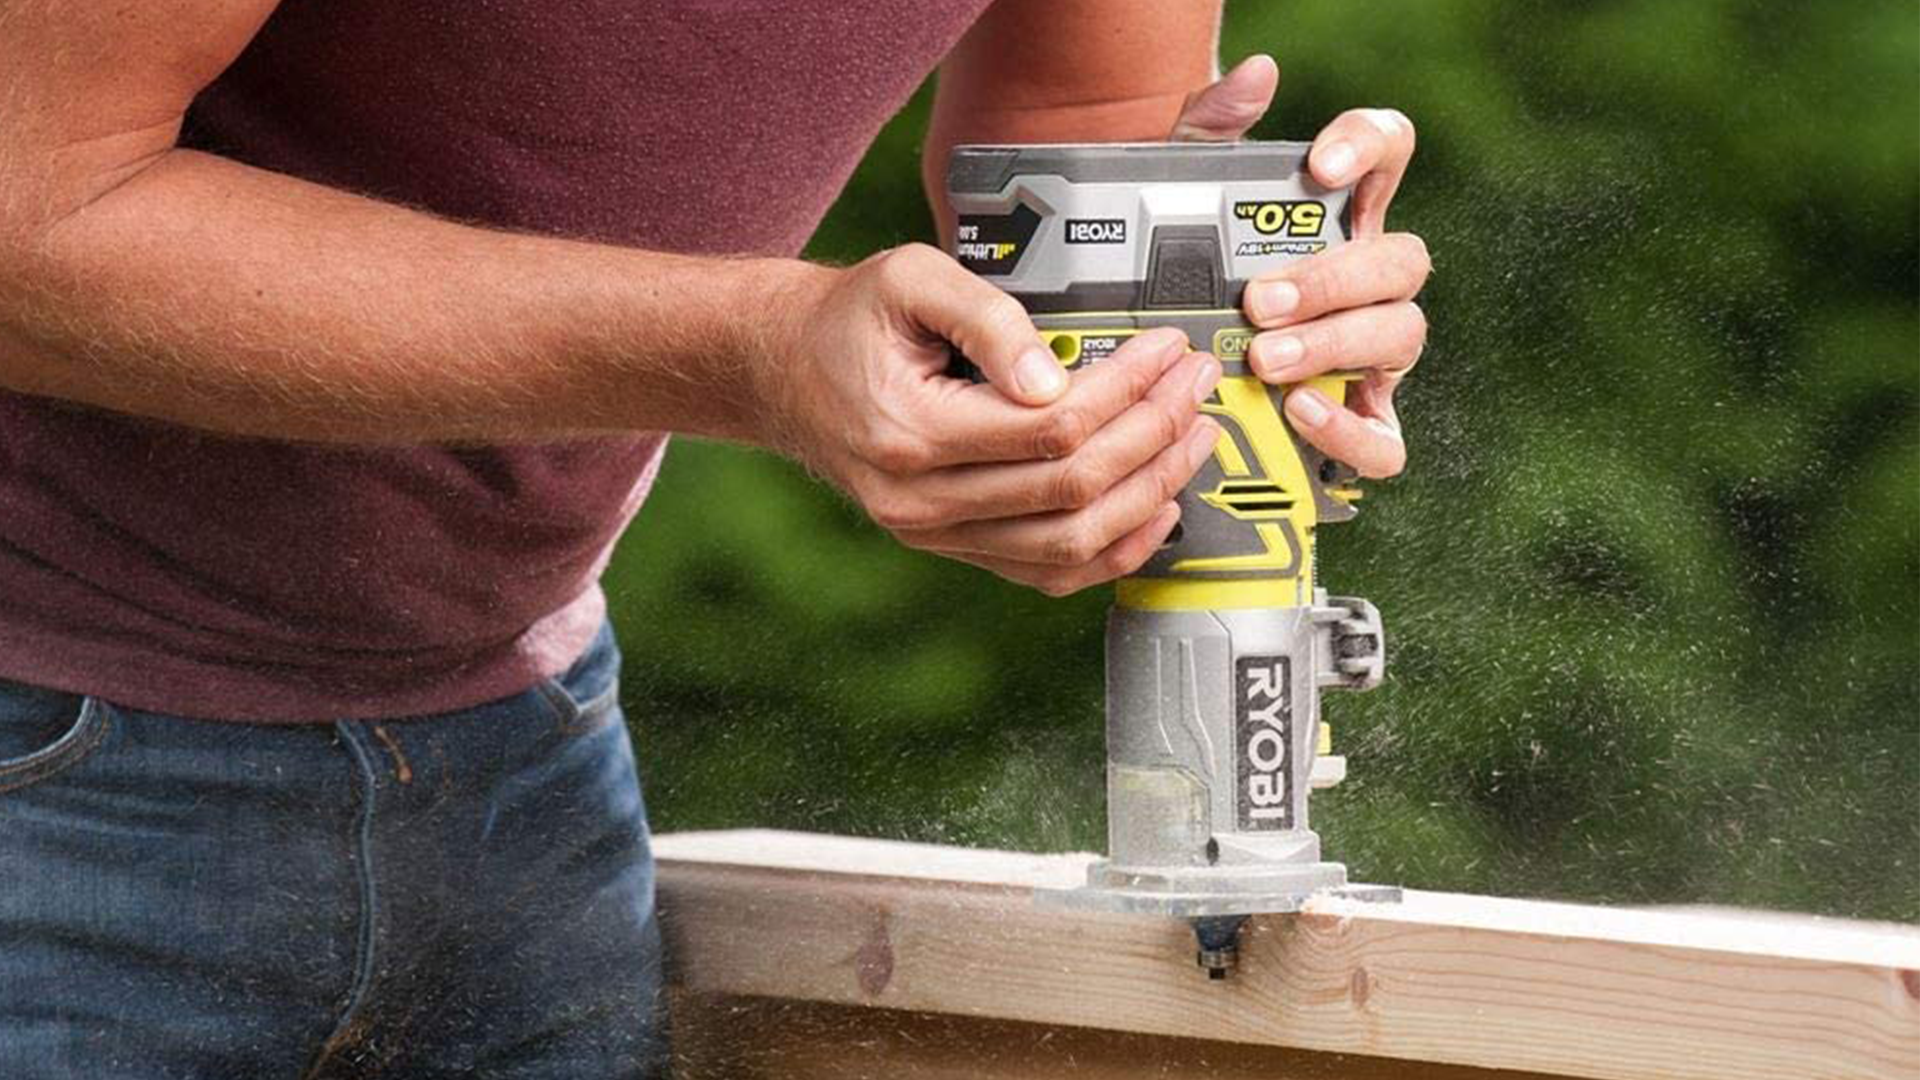 Ryobi 18V 1/4" Cordless Trim review: portable wood router simple but effective |